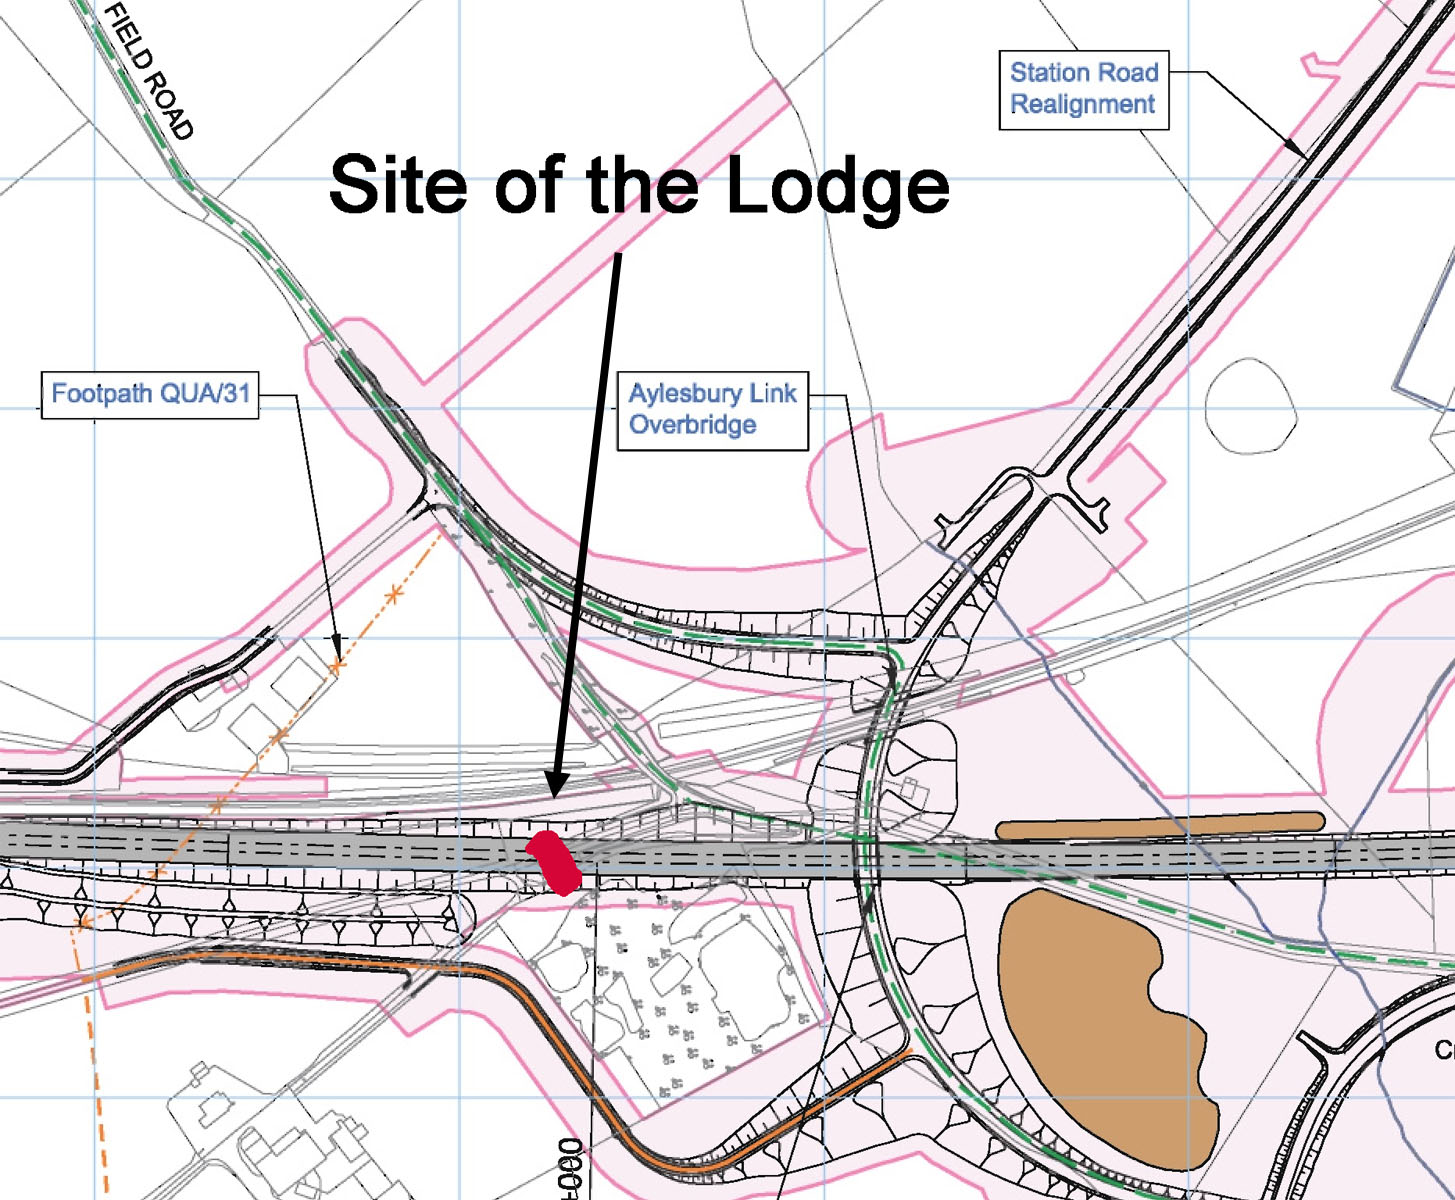 The route of HS2, obliterating the lodge.